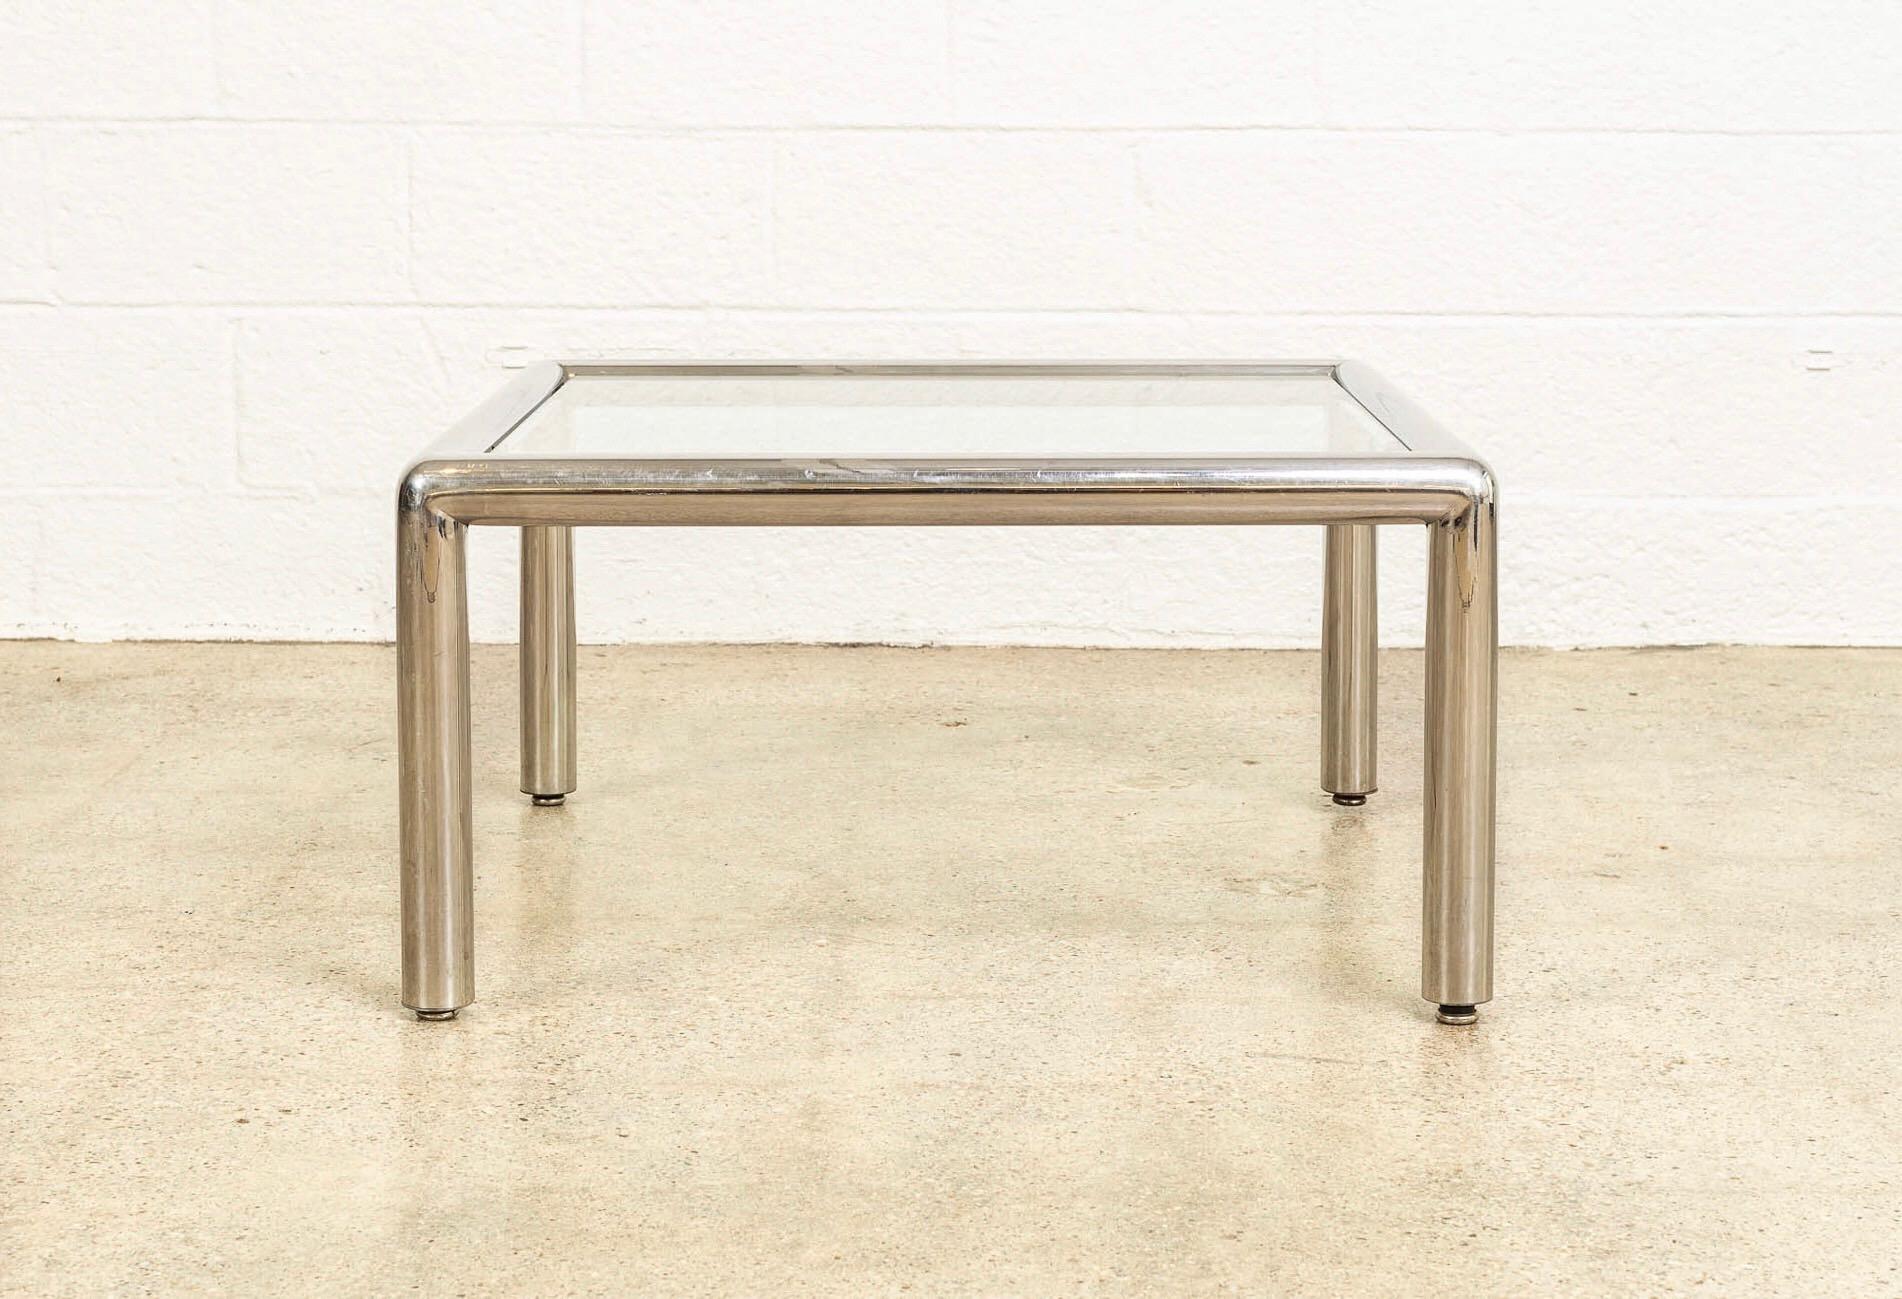 This vintage Mid-Century Modern “Tubo” chrome and glass coffee table was designed by John Mascheroni in 1967. It features a welded polished aluminum tubular frame with a chromed appearance. This table has a brand new 3/8” thick piece of replacement